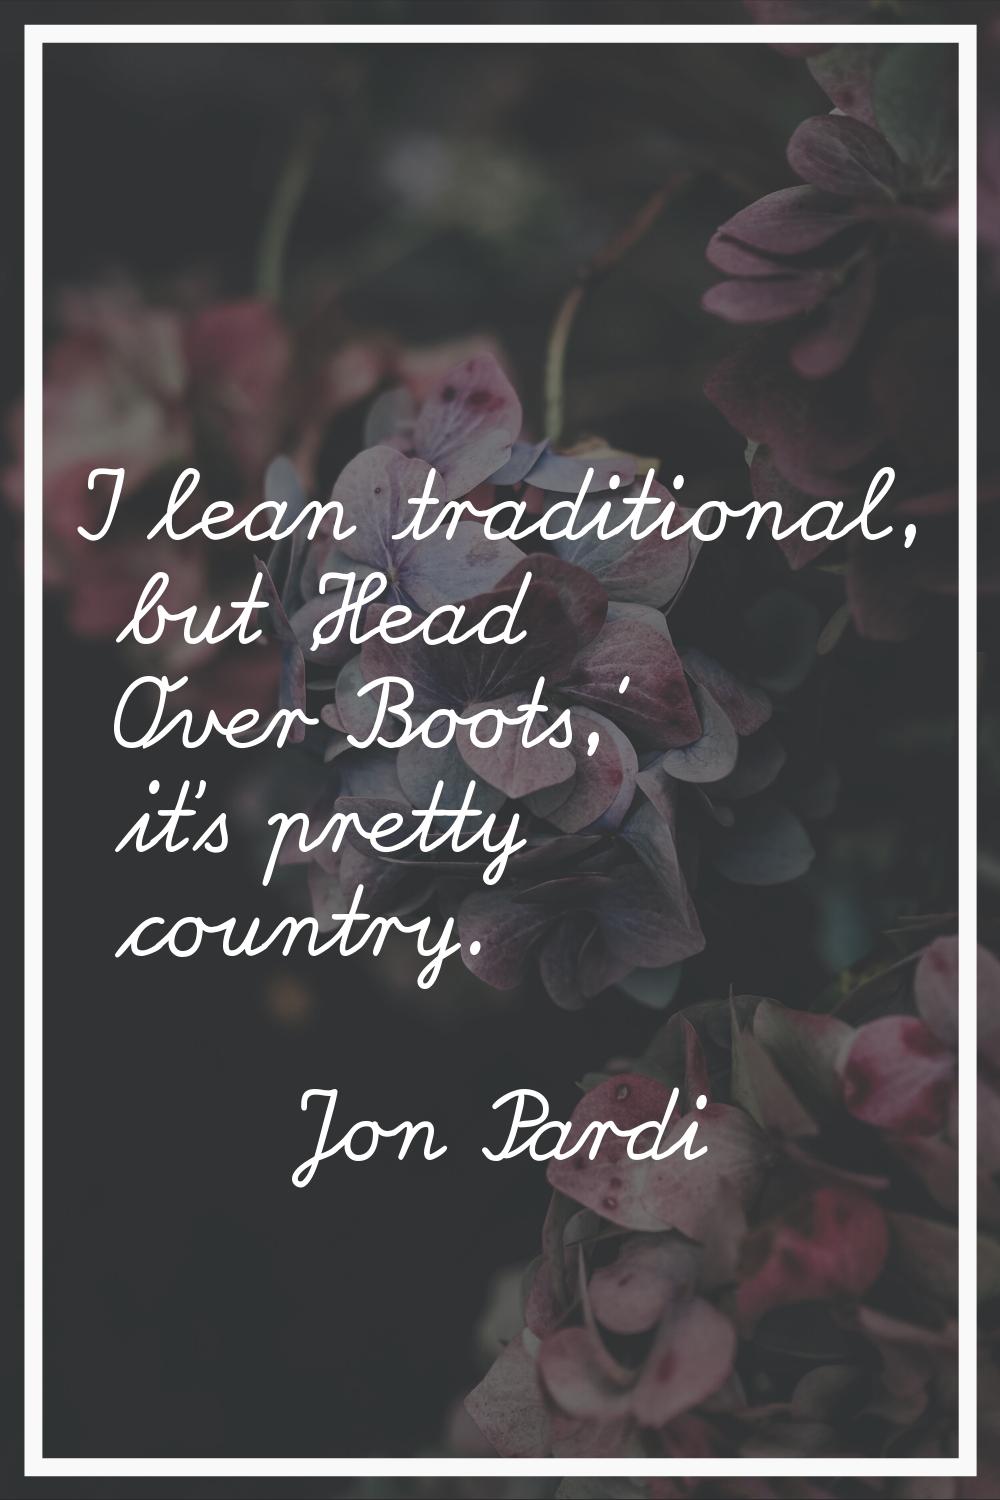 I lean traditional, but 'Head Over Boots,' it's pretty country.